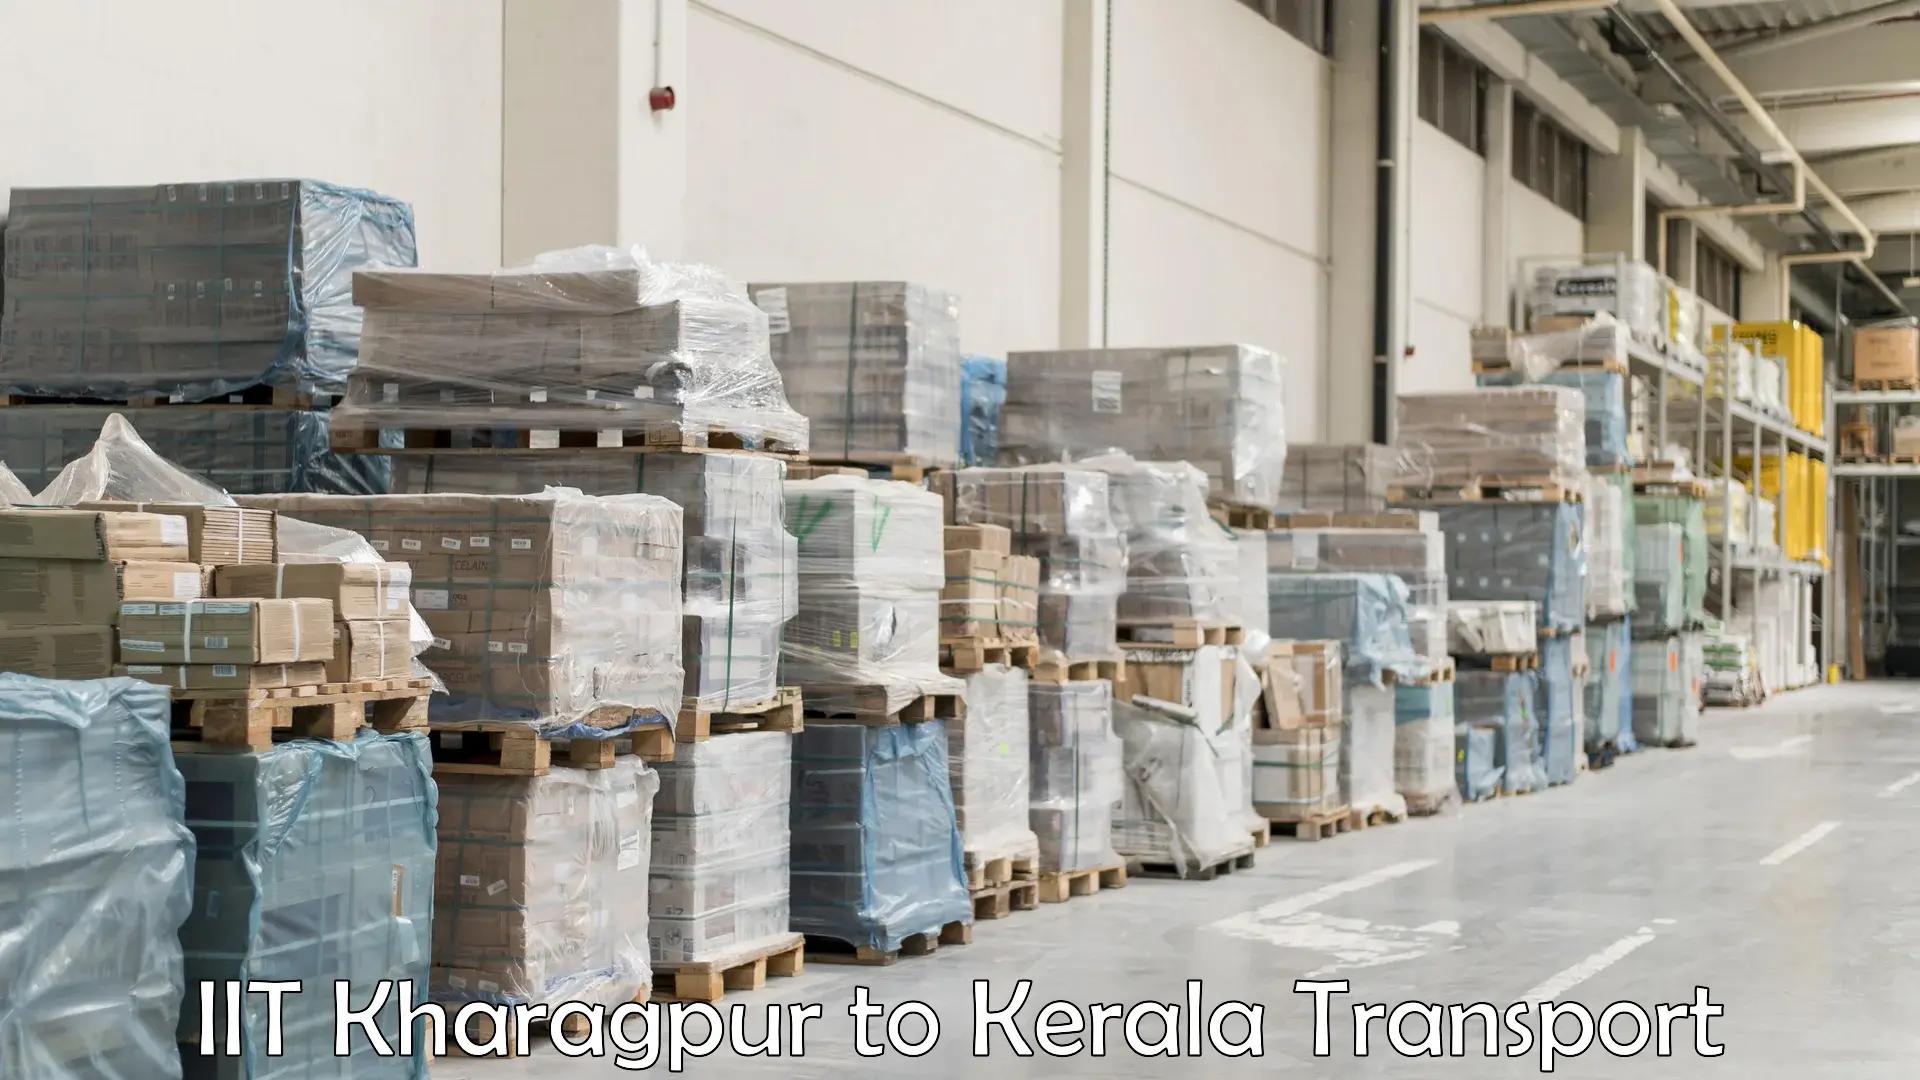 Container transport service IIT Kharagpur to Nenmara